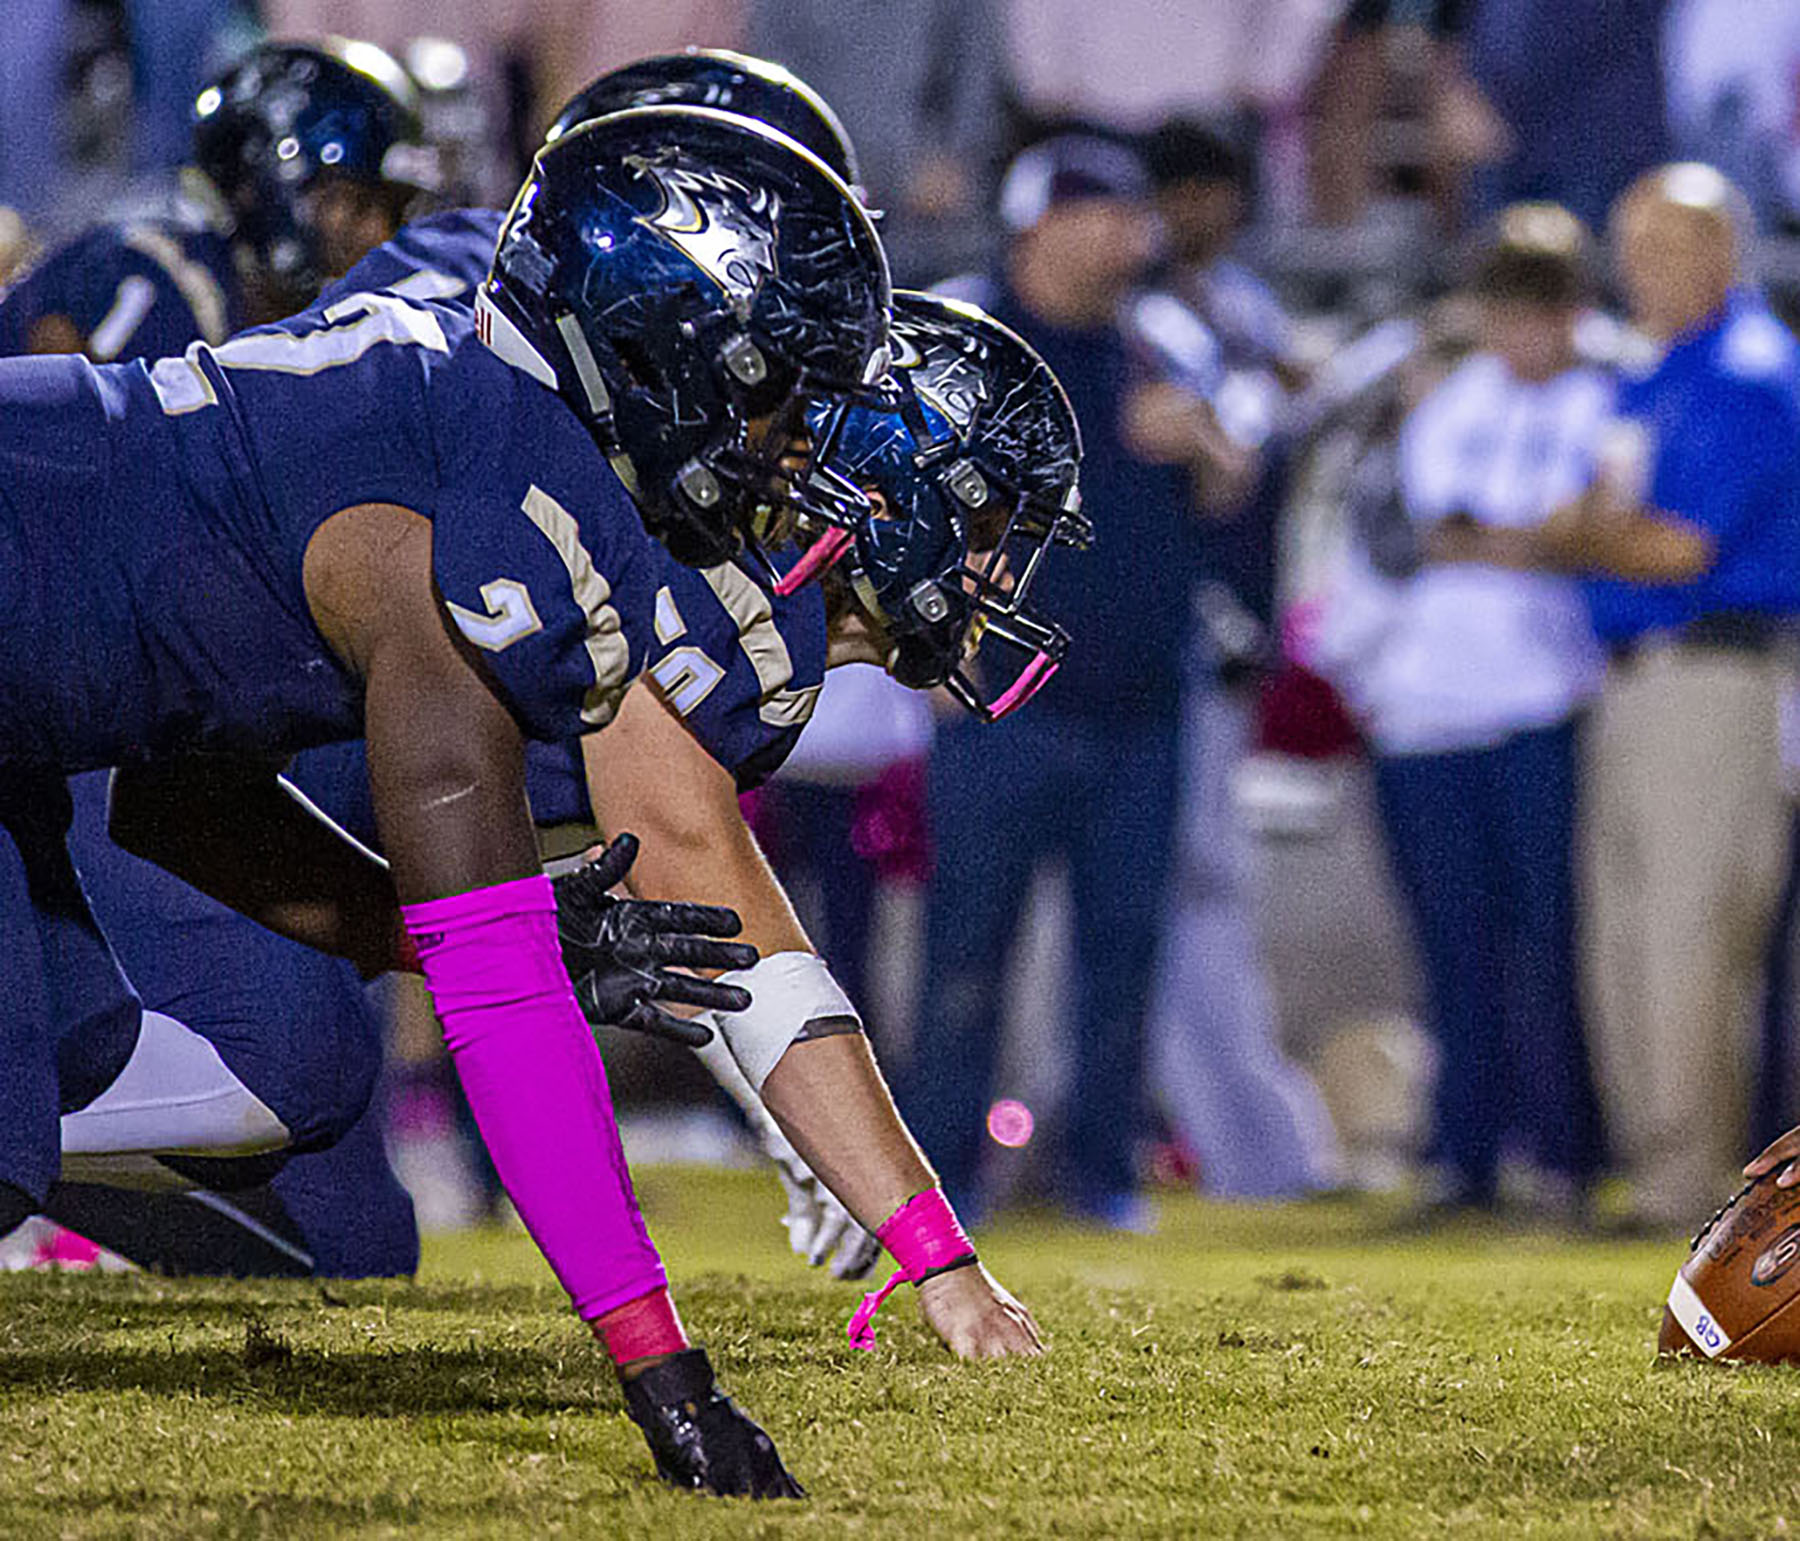 Clay-Chalkville survives scare against Gadsden City to close out regular season